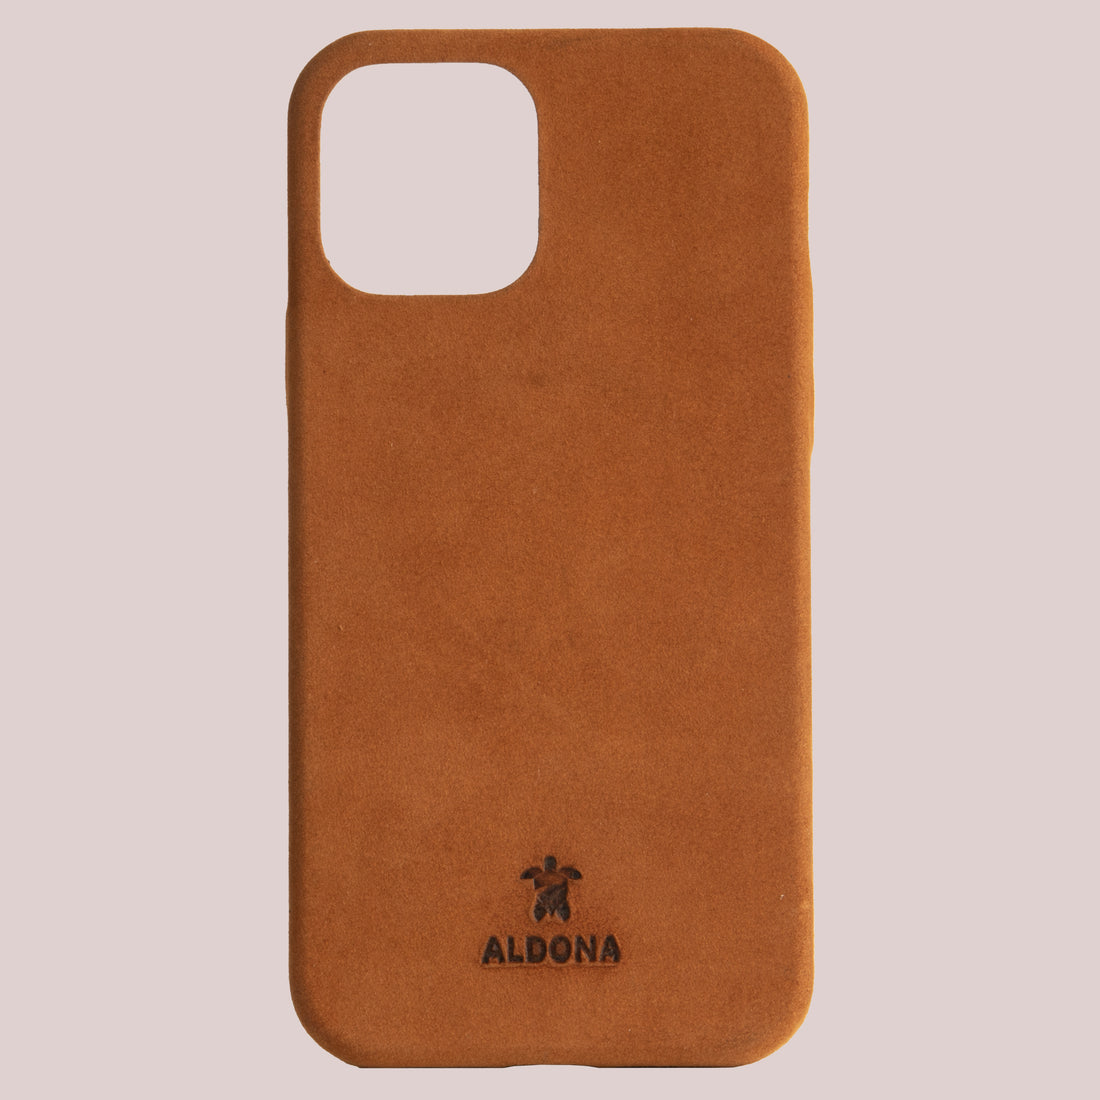 Kalon Case for iPhone 12 series with MagSafe Compatibility - Vintage Tan